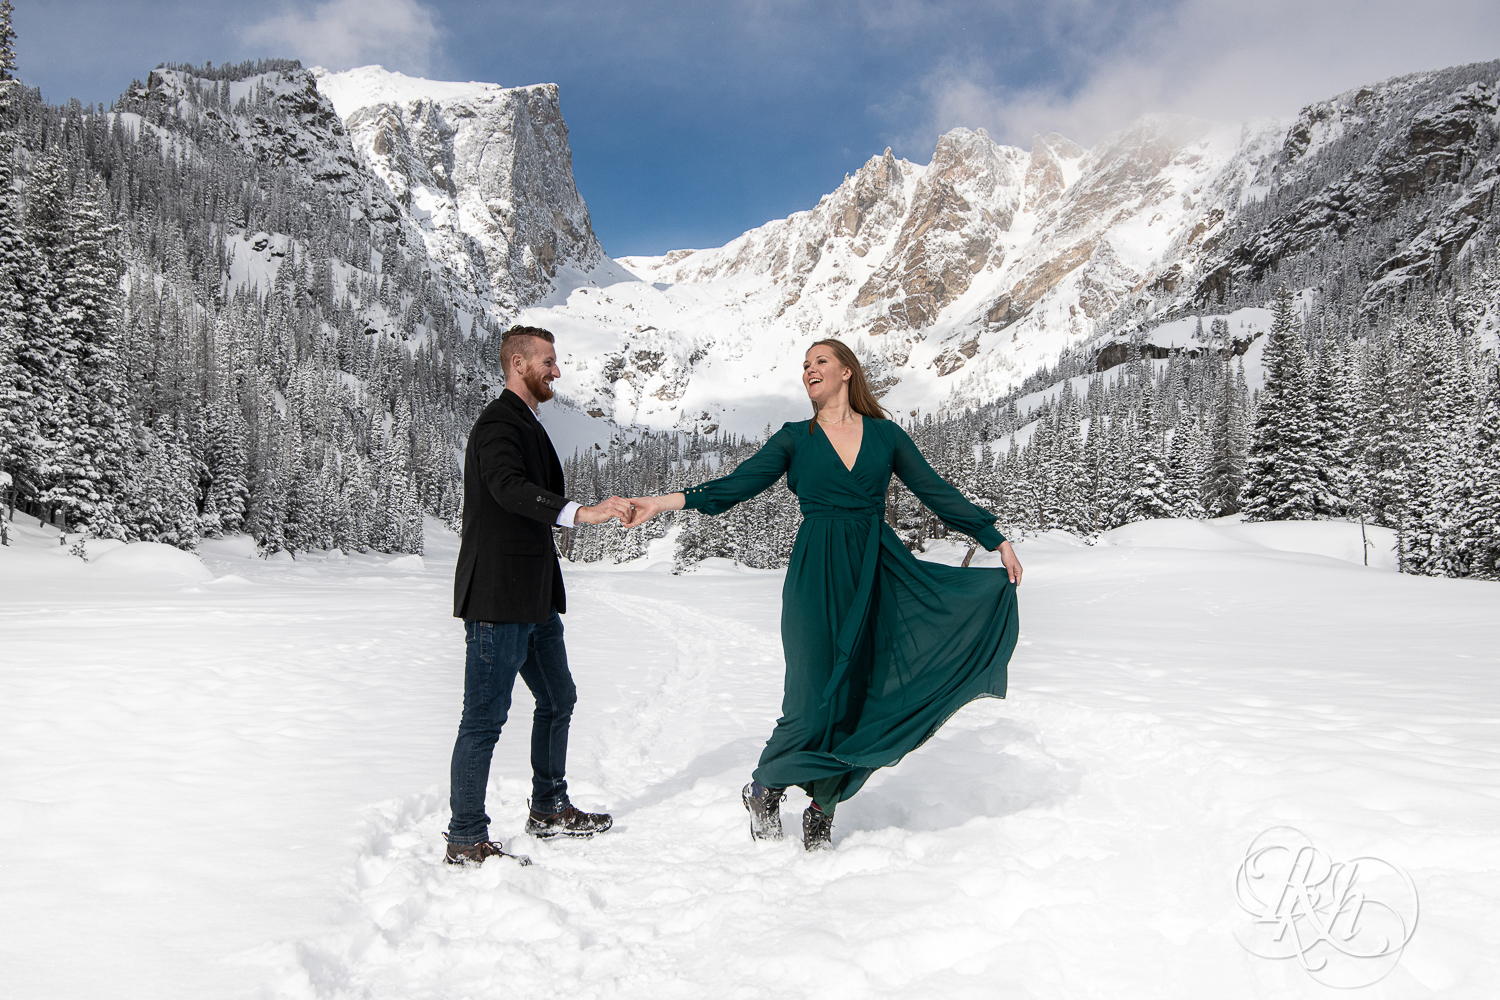 Man in suit and woman in green dress dance in snow on Dream Lake in Rocky Mountain National Park, Colorado.